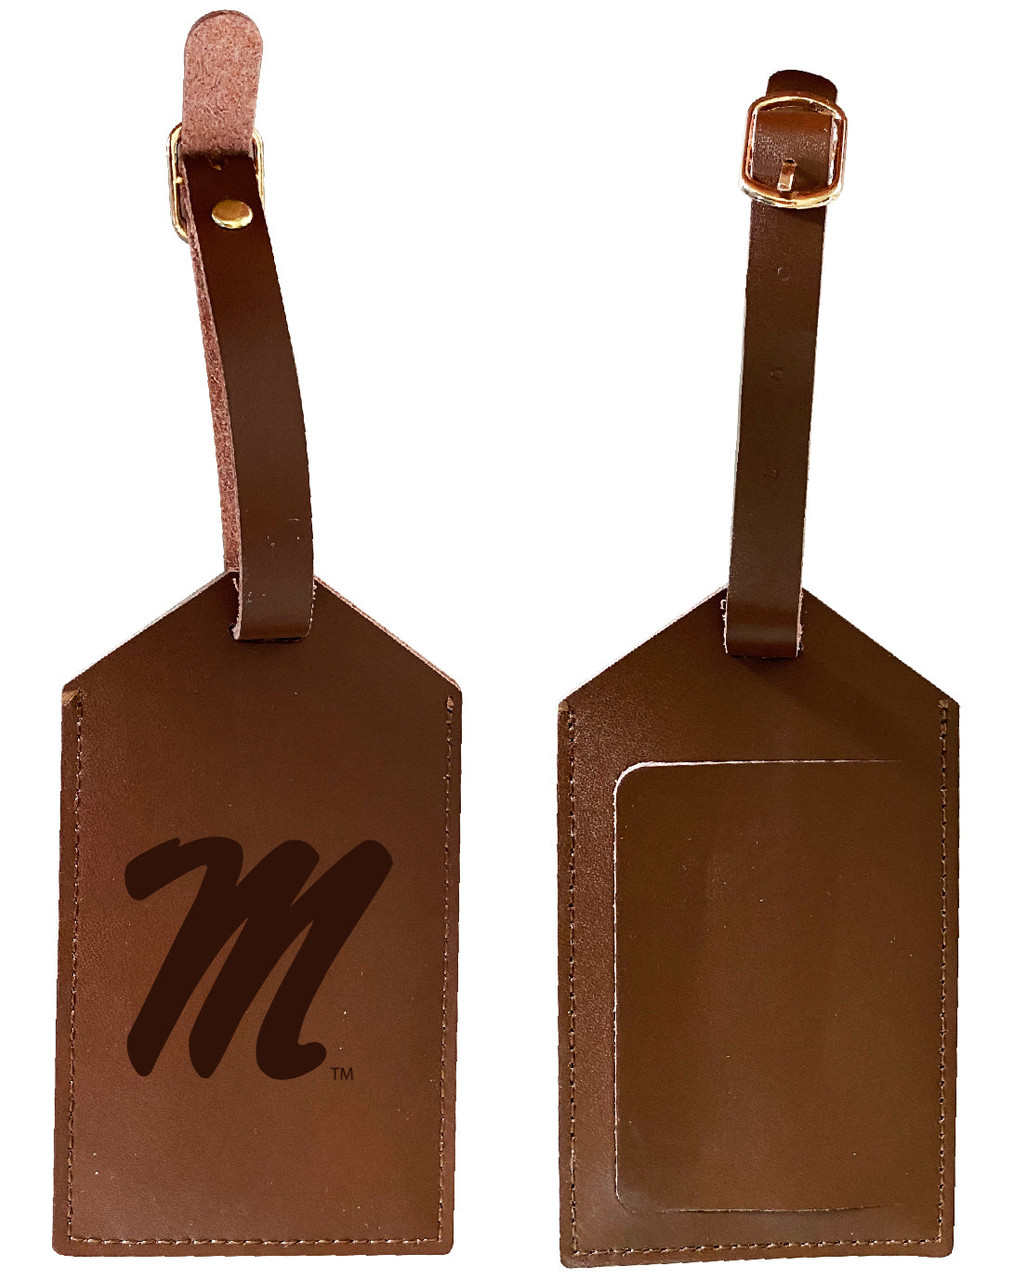 Mississippi Rebels "Ole Miss" Leather Luggage Tag Engraved